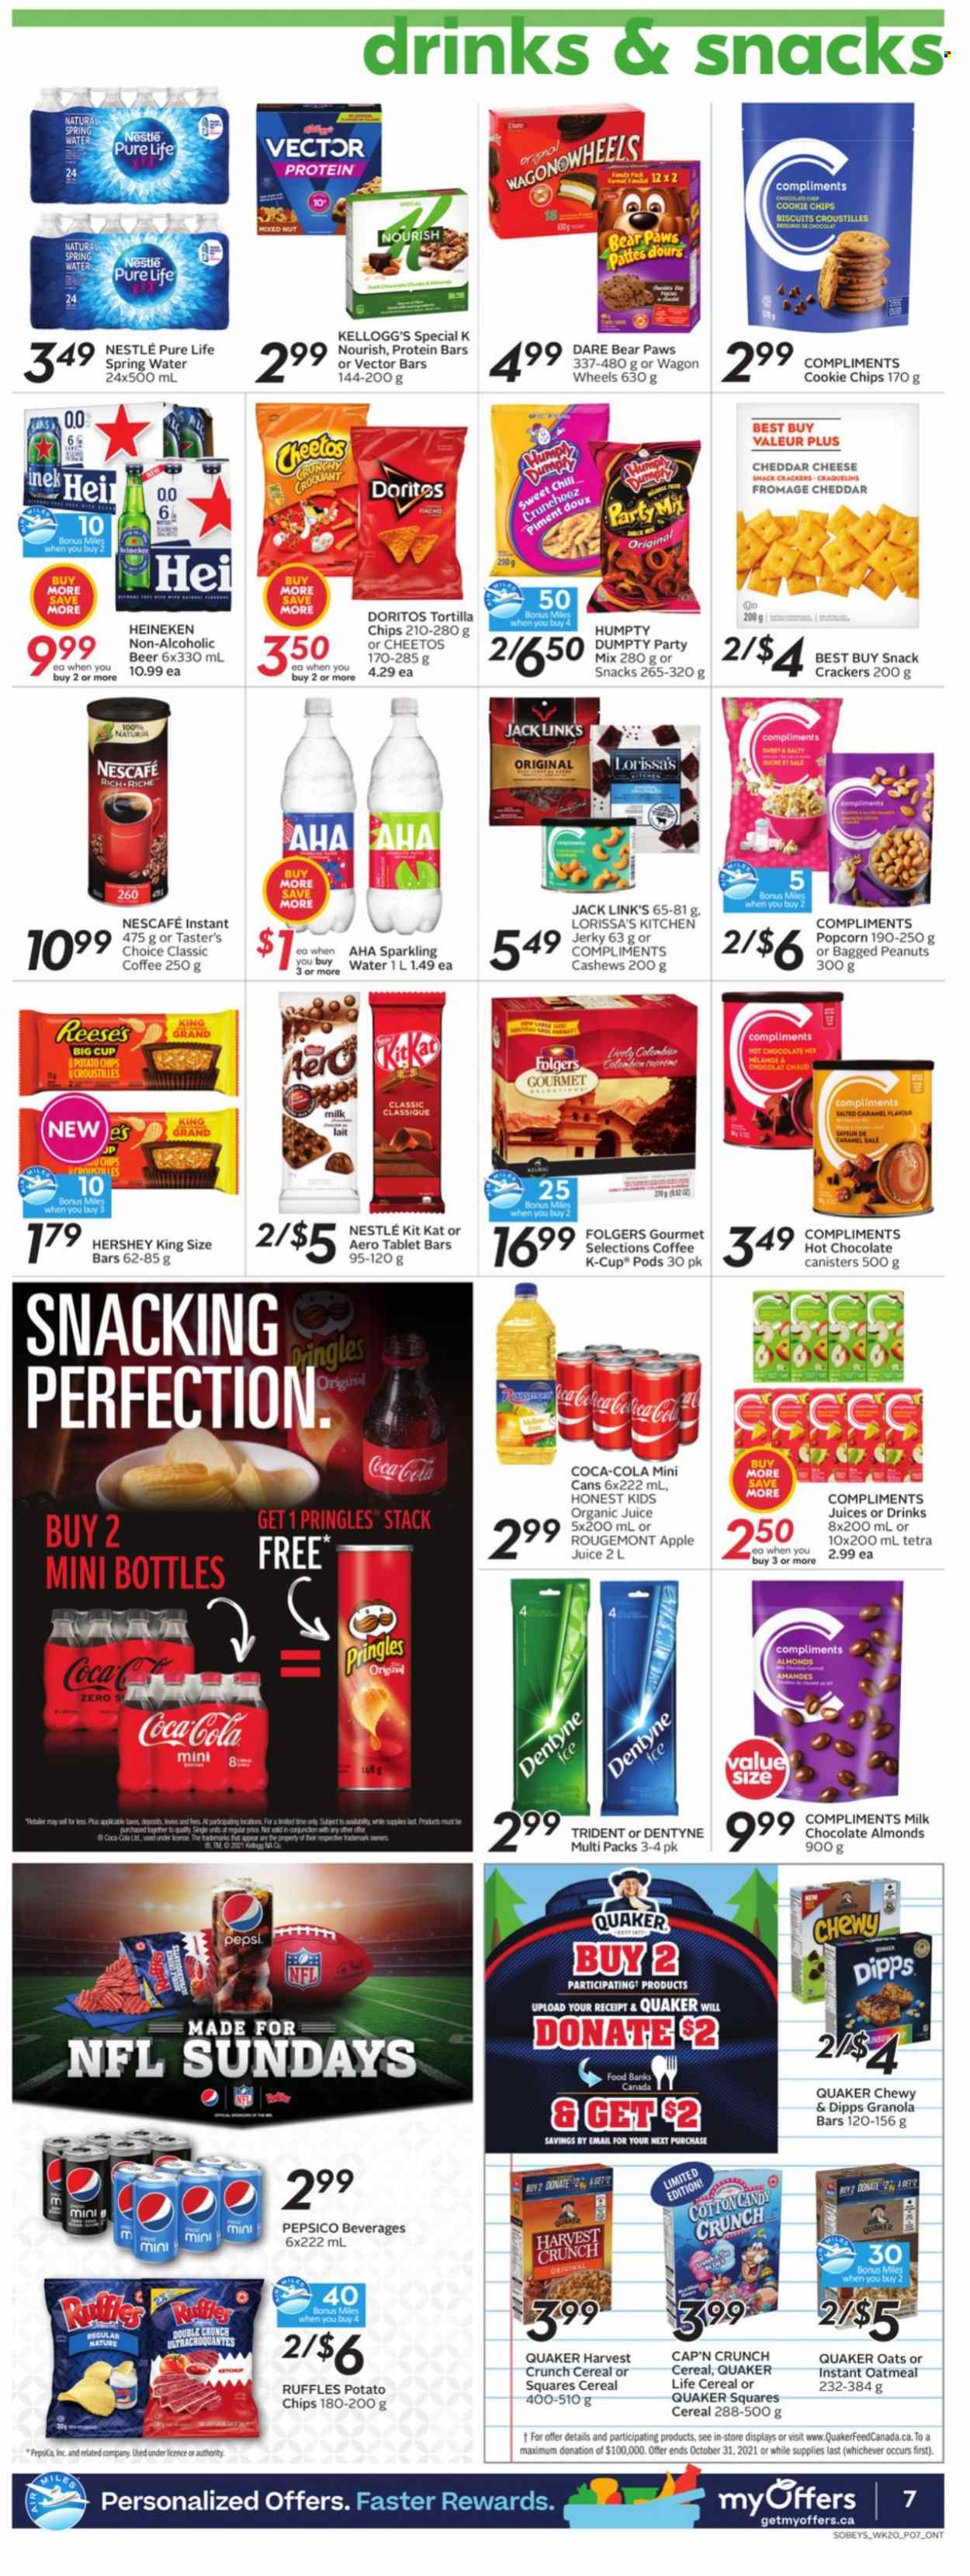 thumbnail - Sobeys Flyer - September 09, 2021 - September 15, 2021 - Sales products - Quaker, jerky, Reese's, milk chocolate, KitKat, crackers, Kellogg's, Trident, Doritos, tortilla chips, potato chips, Pringles, Cheetos, popcorn, Ruffles, Jack Link's, oatmeal, oats, cereals, protein bar, granola bar, Cap'n Crunch, cashews, peanuts, Coca-Cola, Pepsi, juice, spring water, hot chocolate, coffee, Folgers, coffee capsules, K-Cups, beer, Heineken, Paws, Nestlé, chips, Nescafé. Page 8.